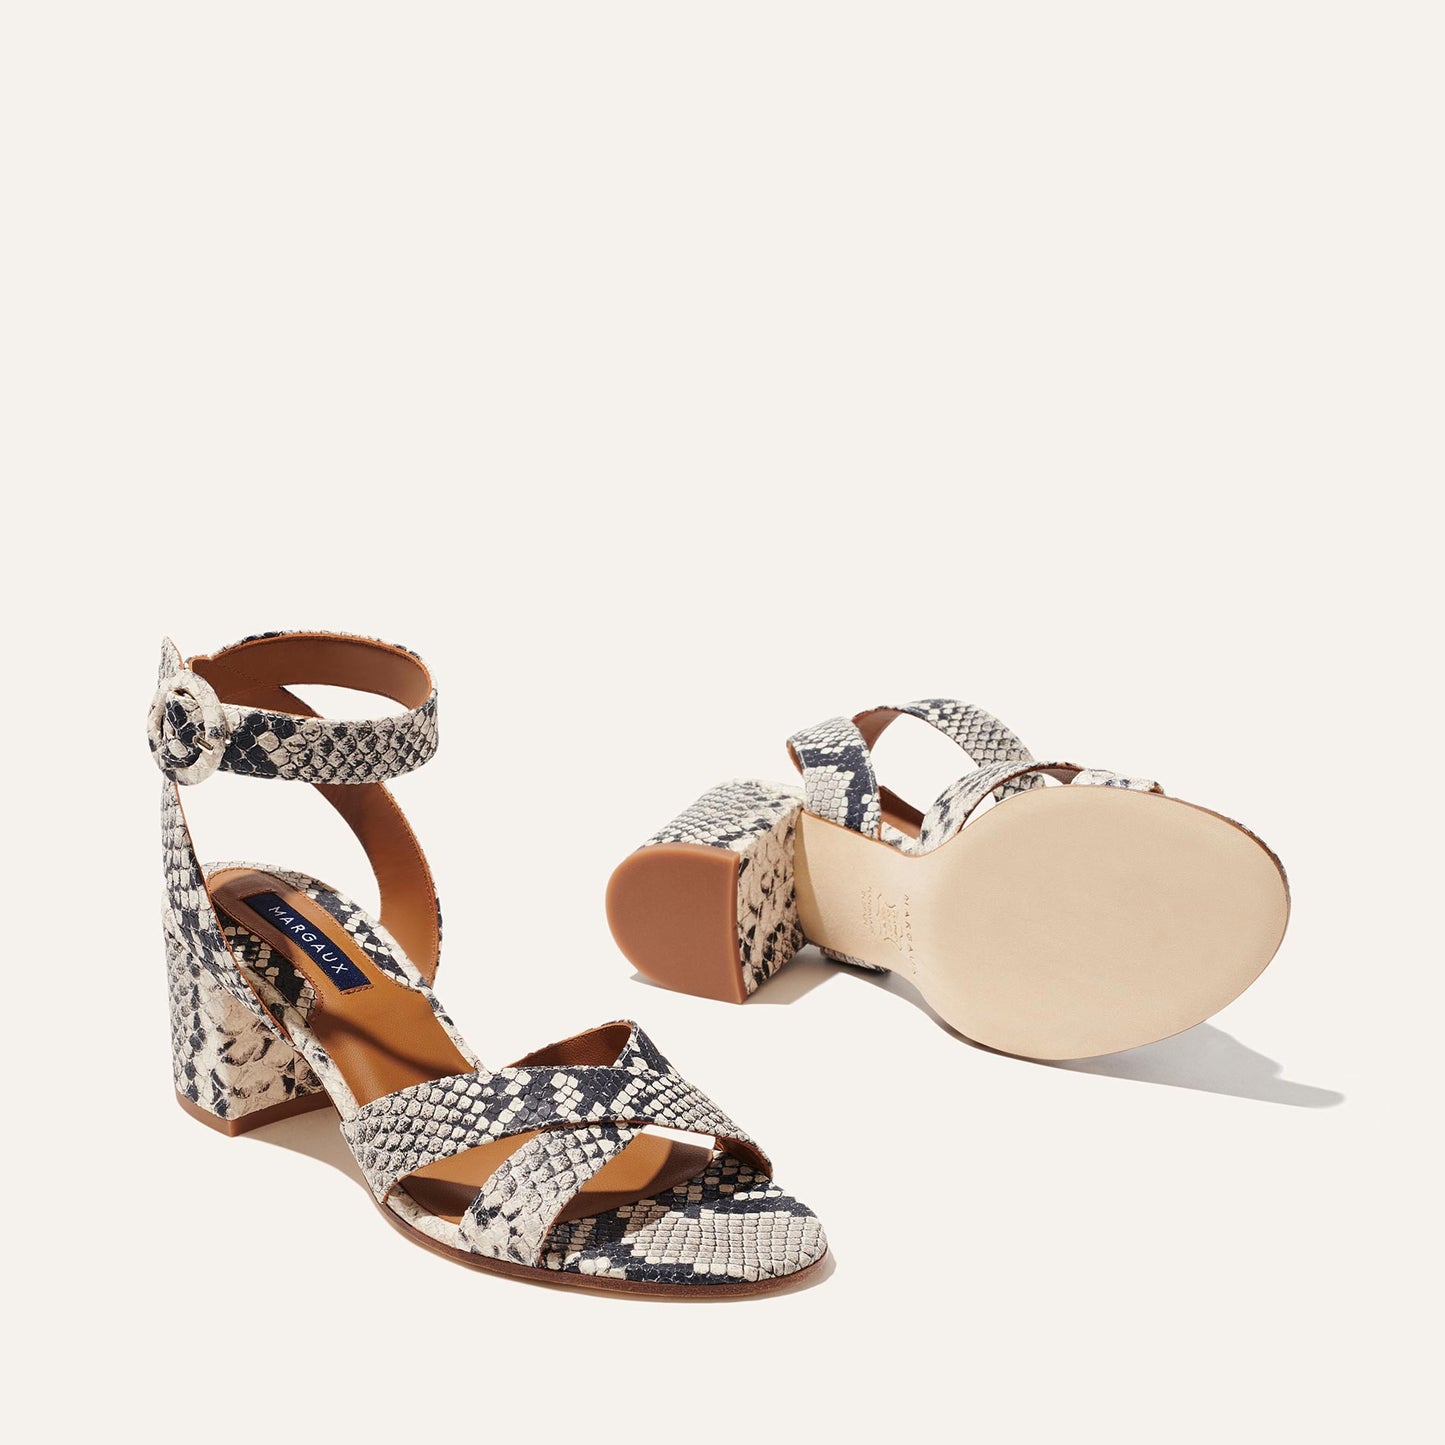 The City Sandal - Natural Python Embossed